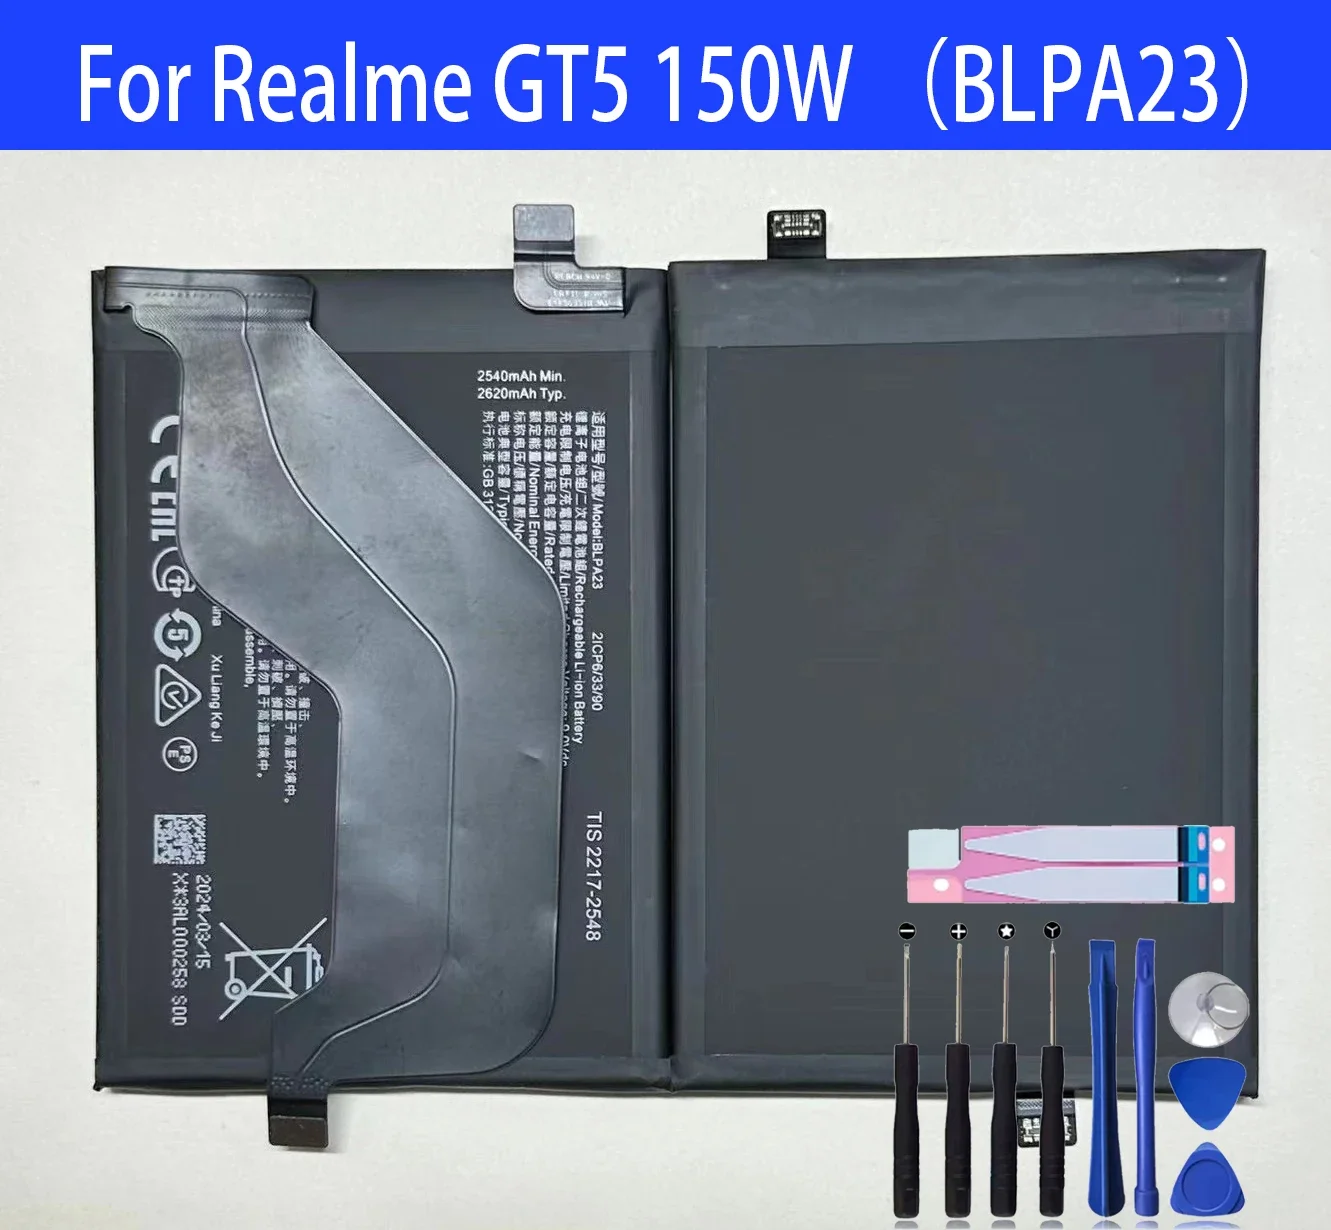 

100% New Original Replacement Battery BLPA23 For Realme GT5 150W Phone Battery+Tools